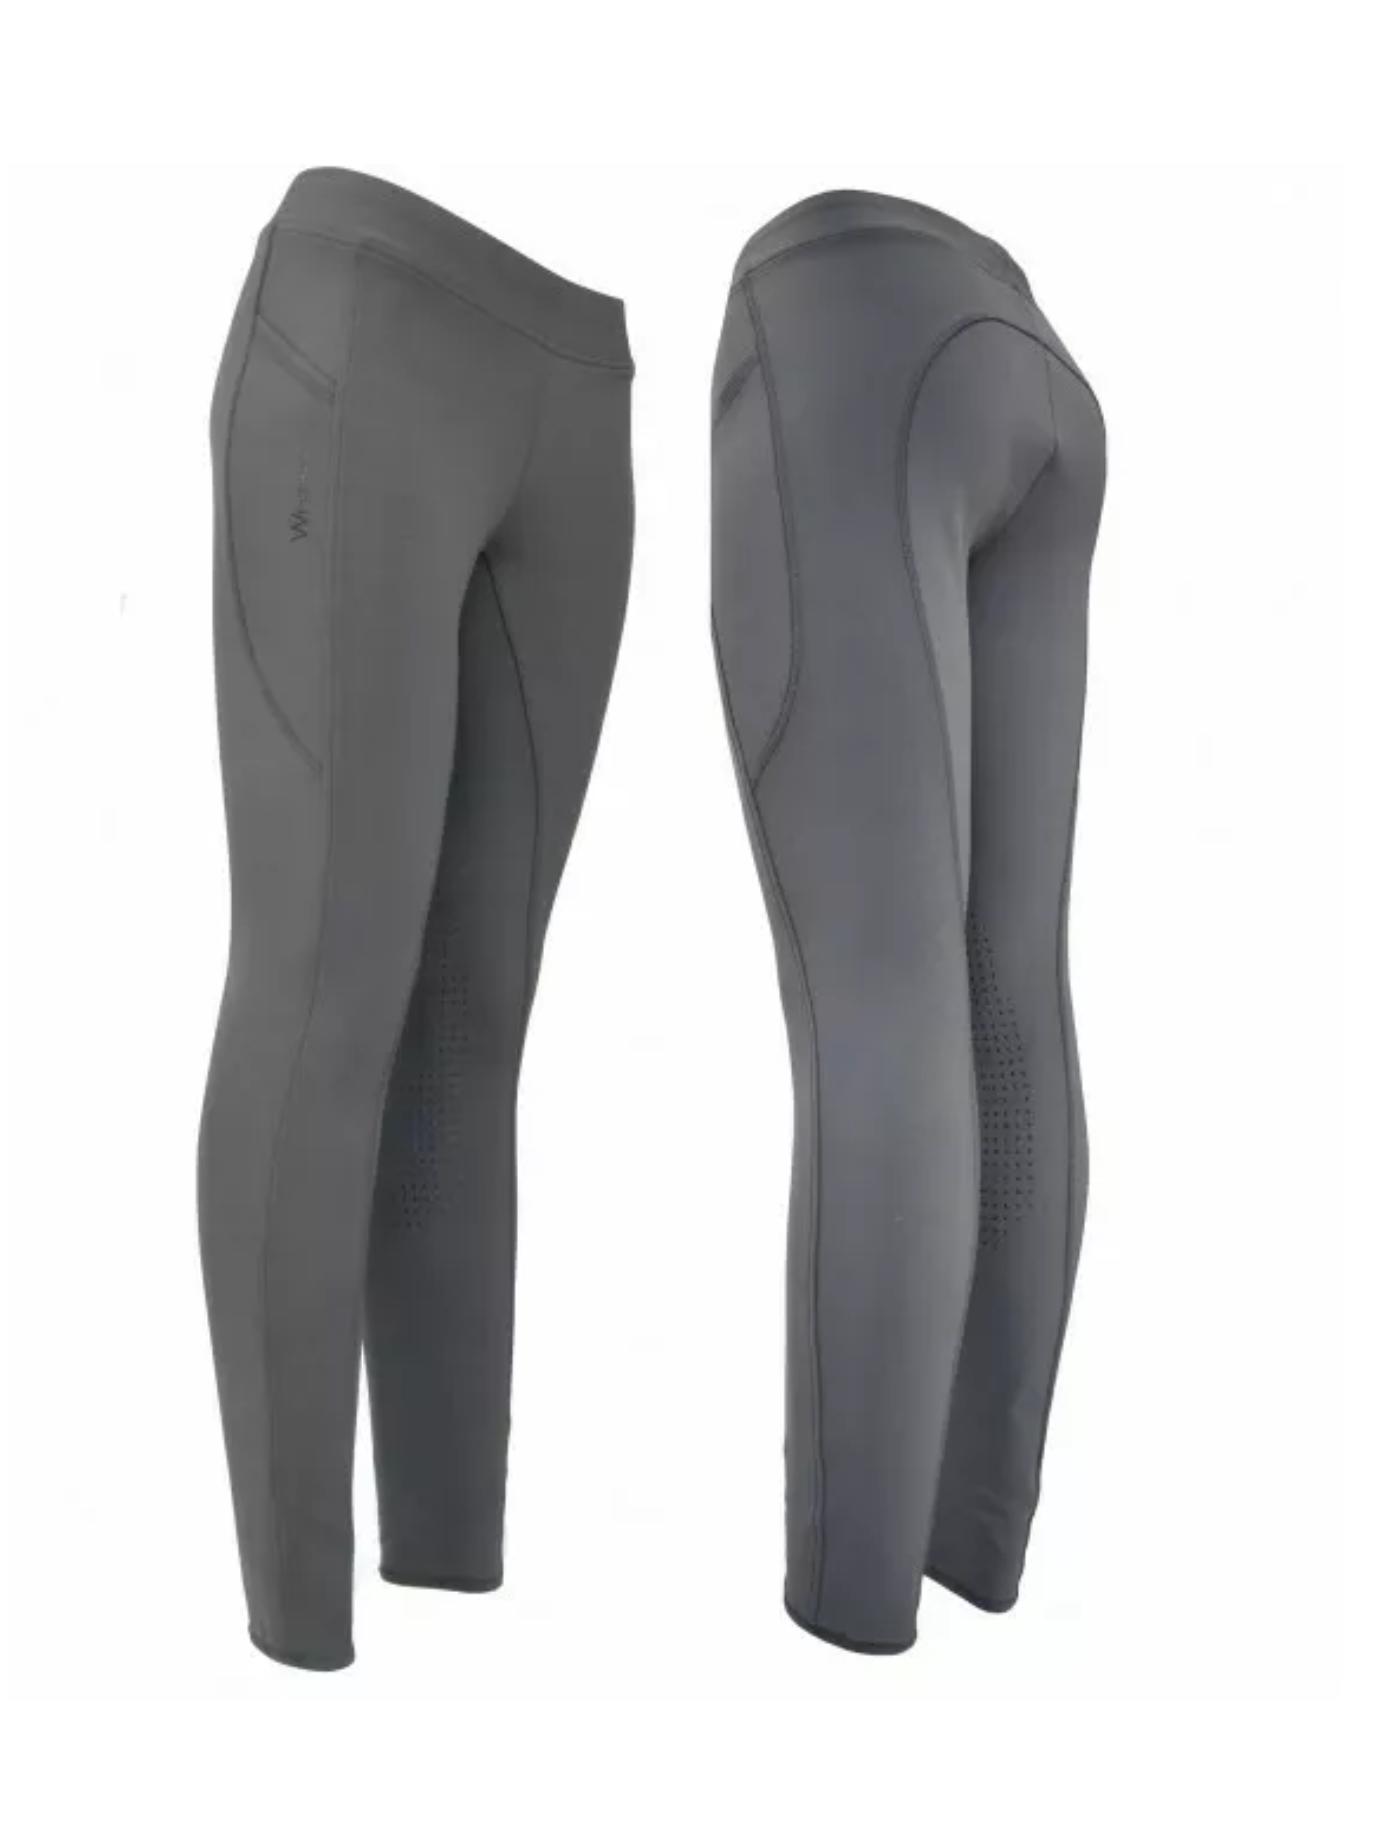 WHITAKER RIDING TIGHTS SILICONE KNEE & PHONE POCKETS